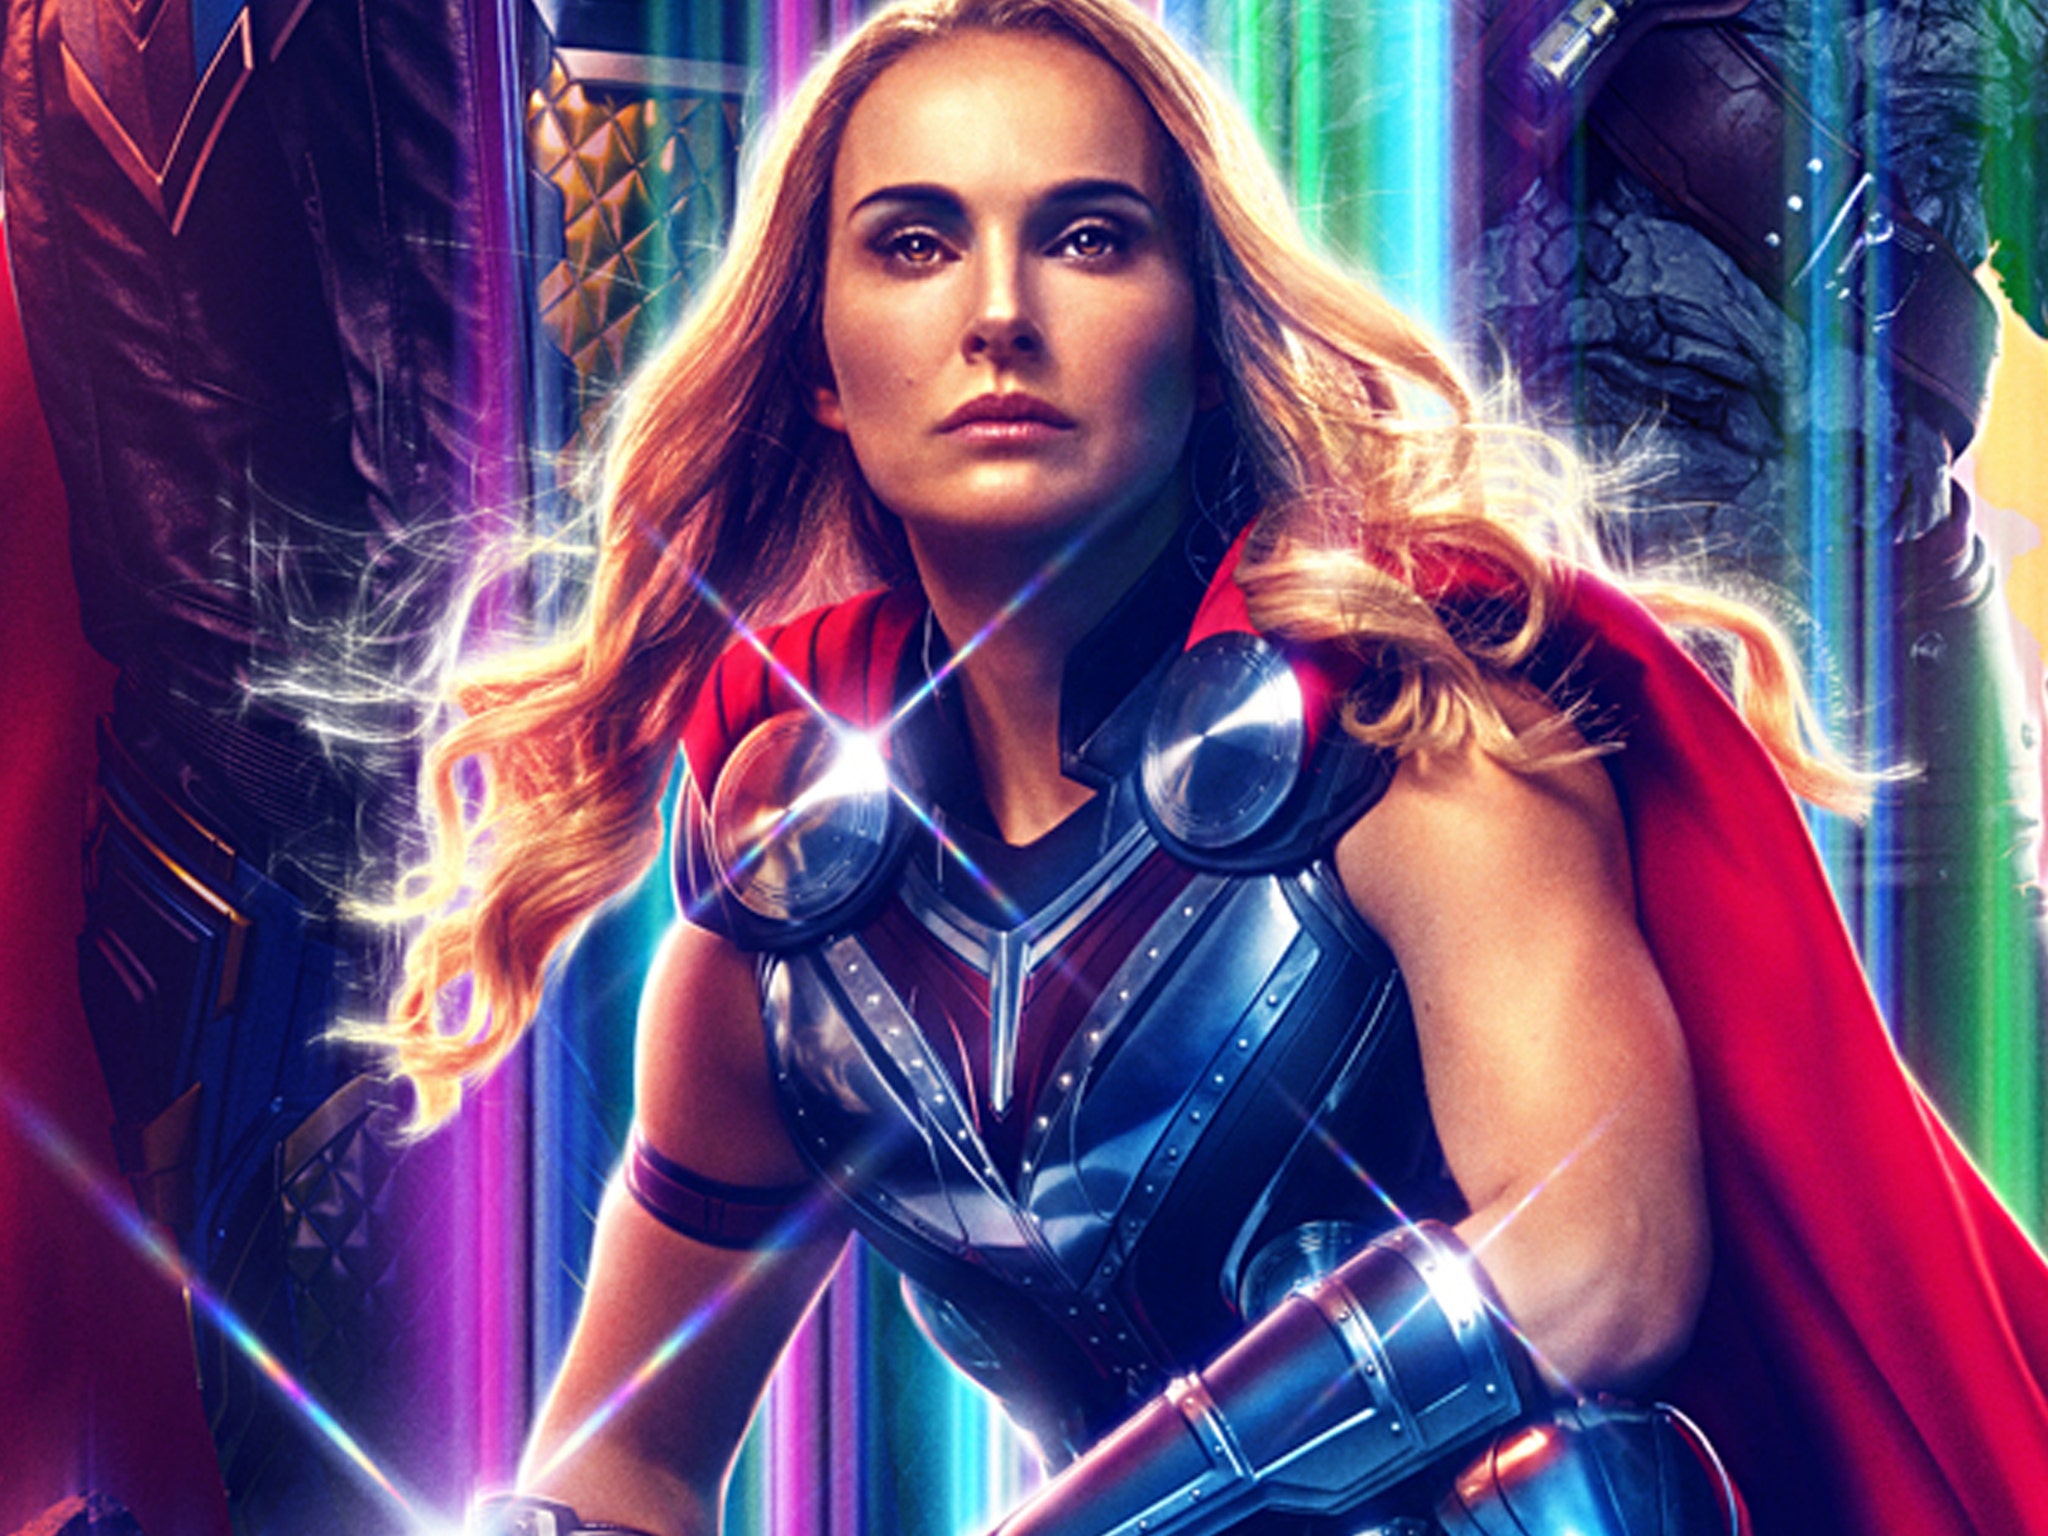 Is Natalie Portman's muscular arm in Thor: Love and Thunder real or  computer engineered? - Quora